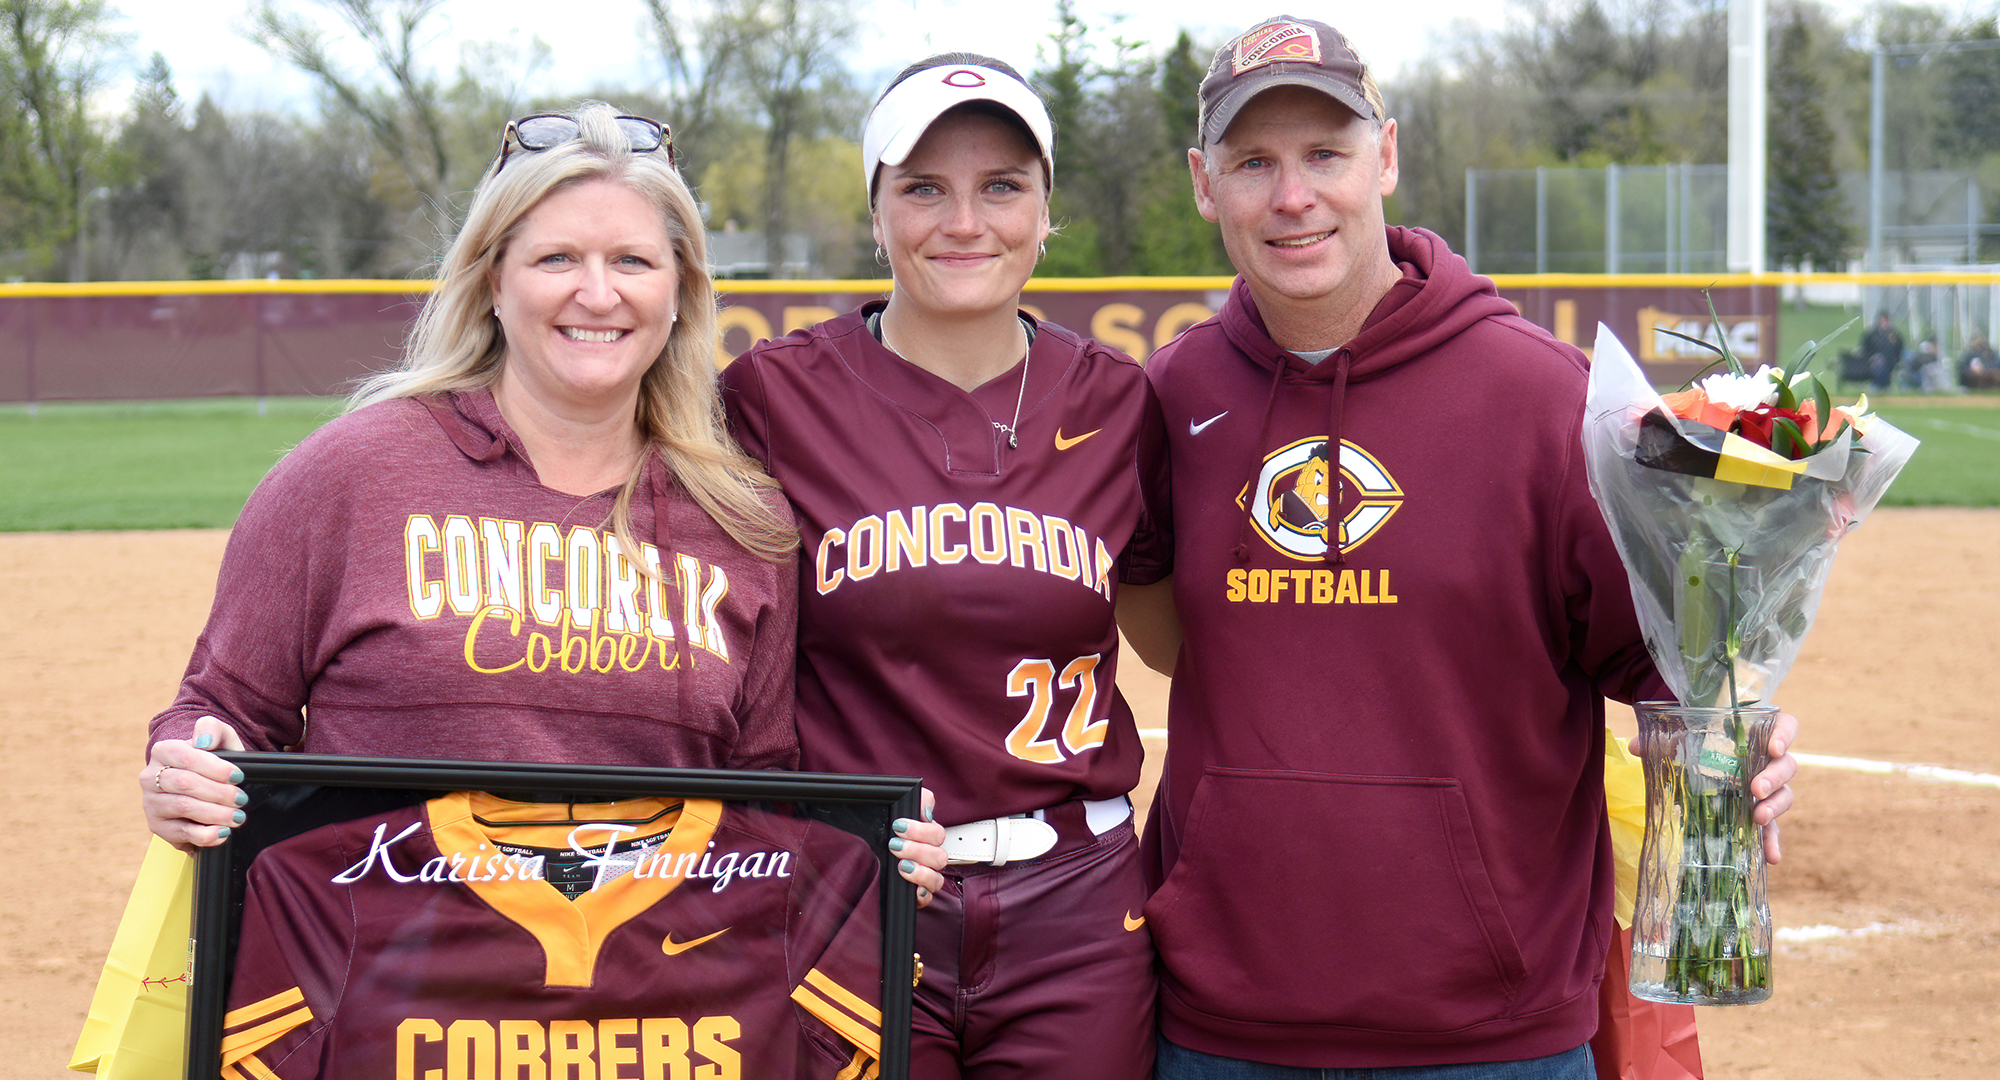 Senior Karissa Finnigan and her parents were honored in between games of the Cobbers' doubleheader against St. Olaf.